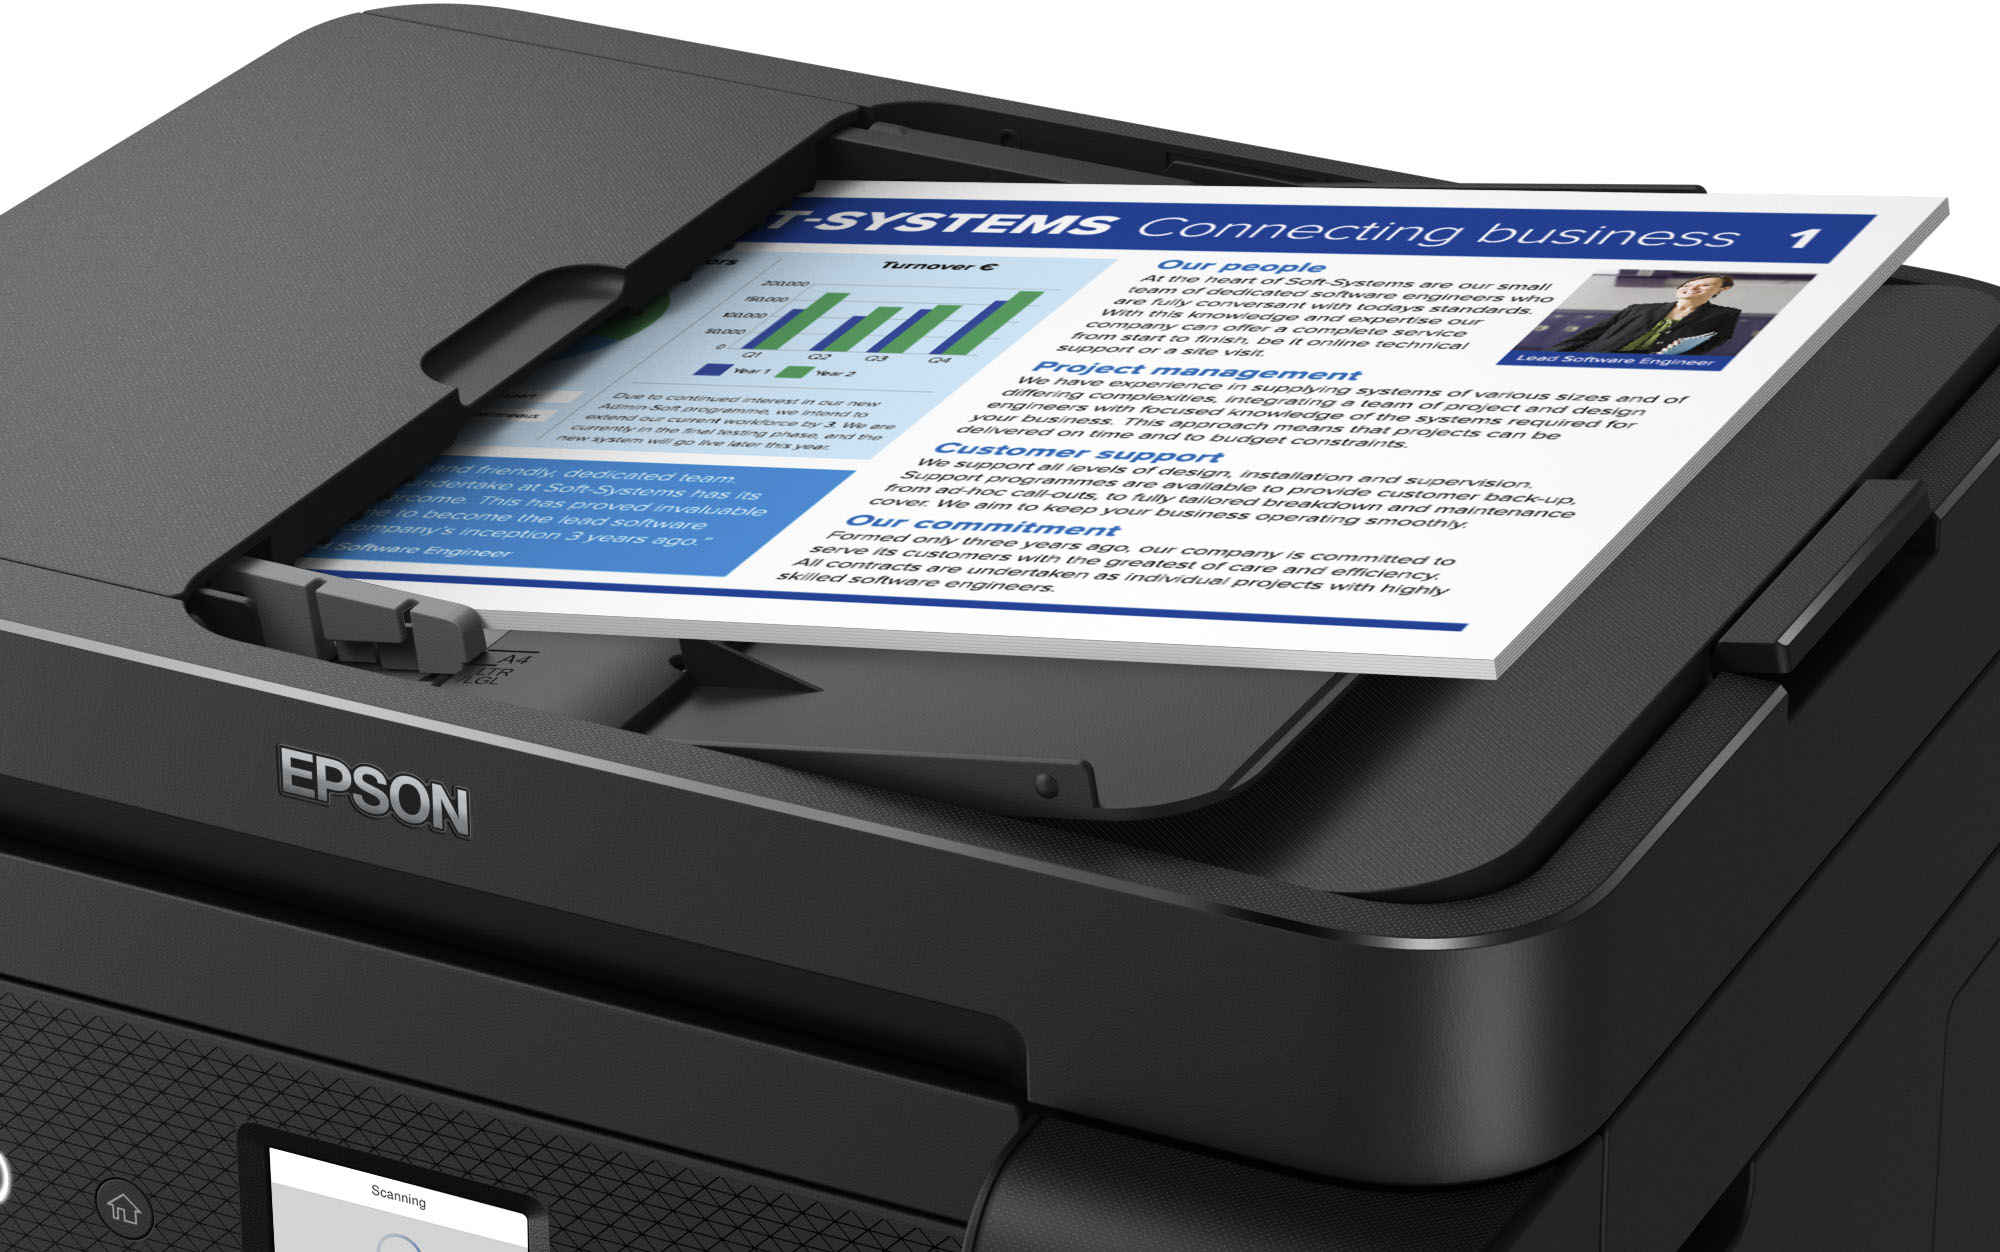 Epson EcoTank ET-4850 Wireless All-in-One Cartridge-Free Supertank Printer  with Scanner, Copier, Fax, ADF and Ethernet – The Perfect Printer Office 